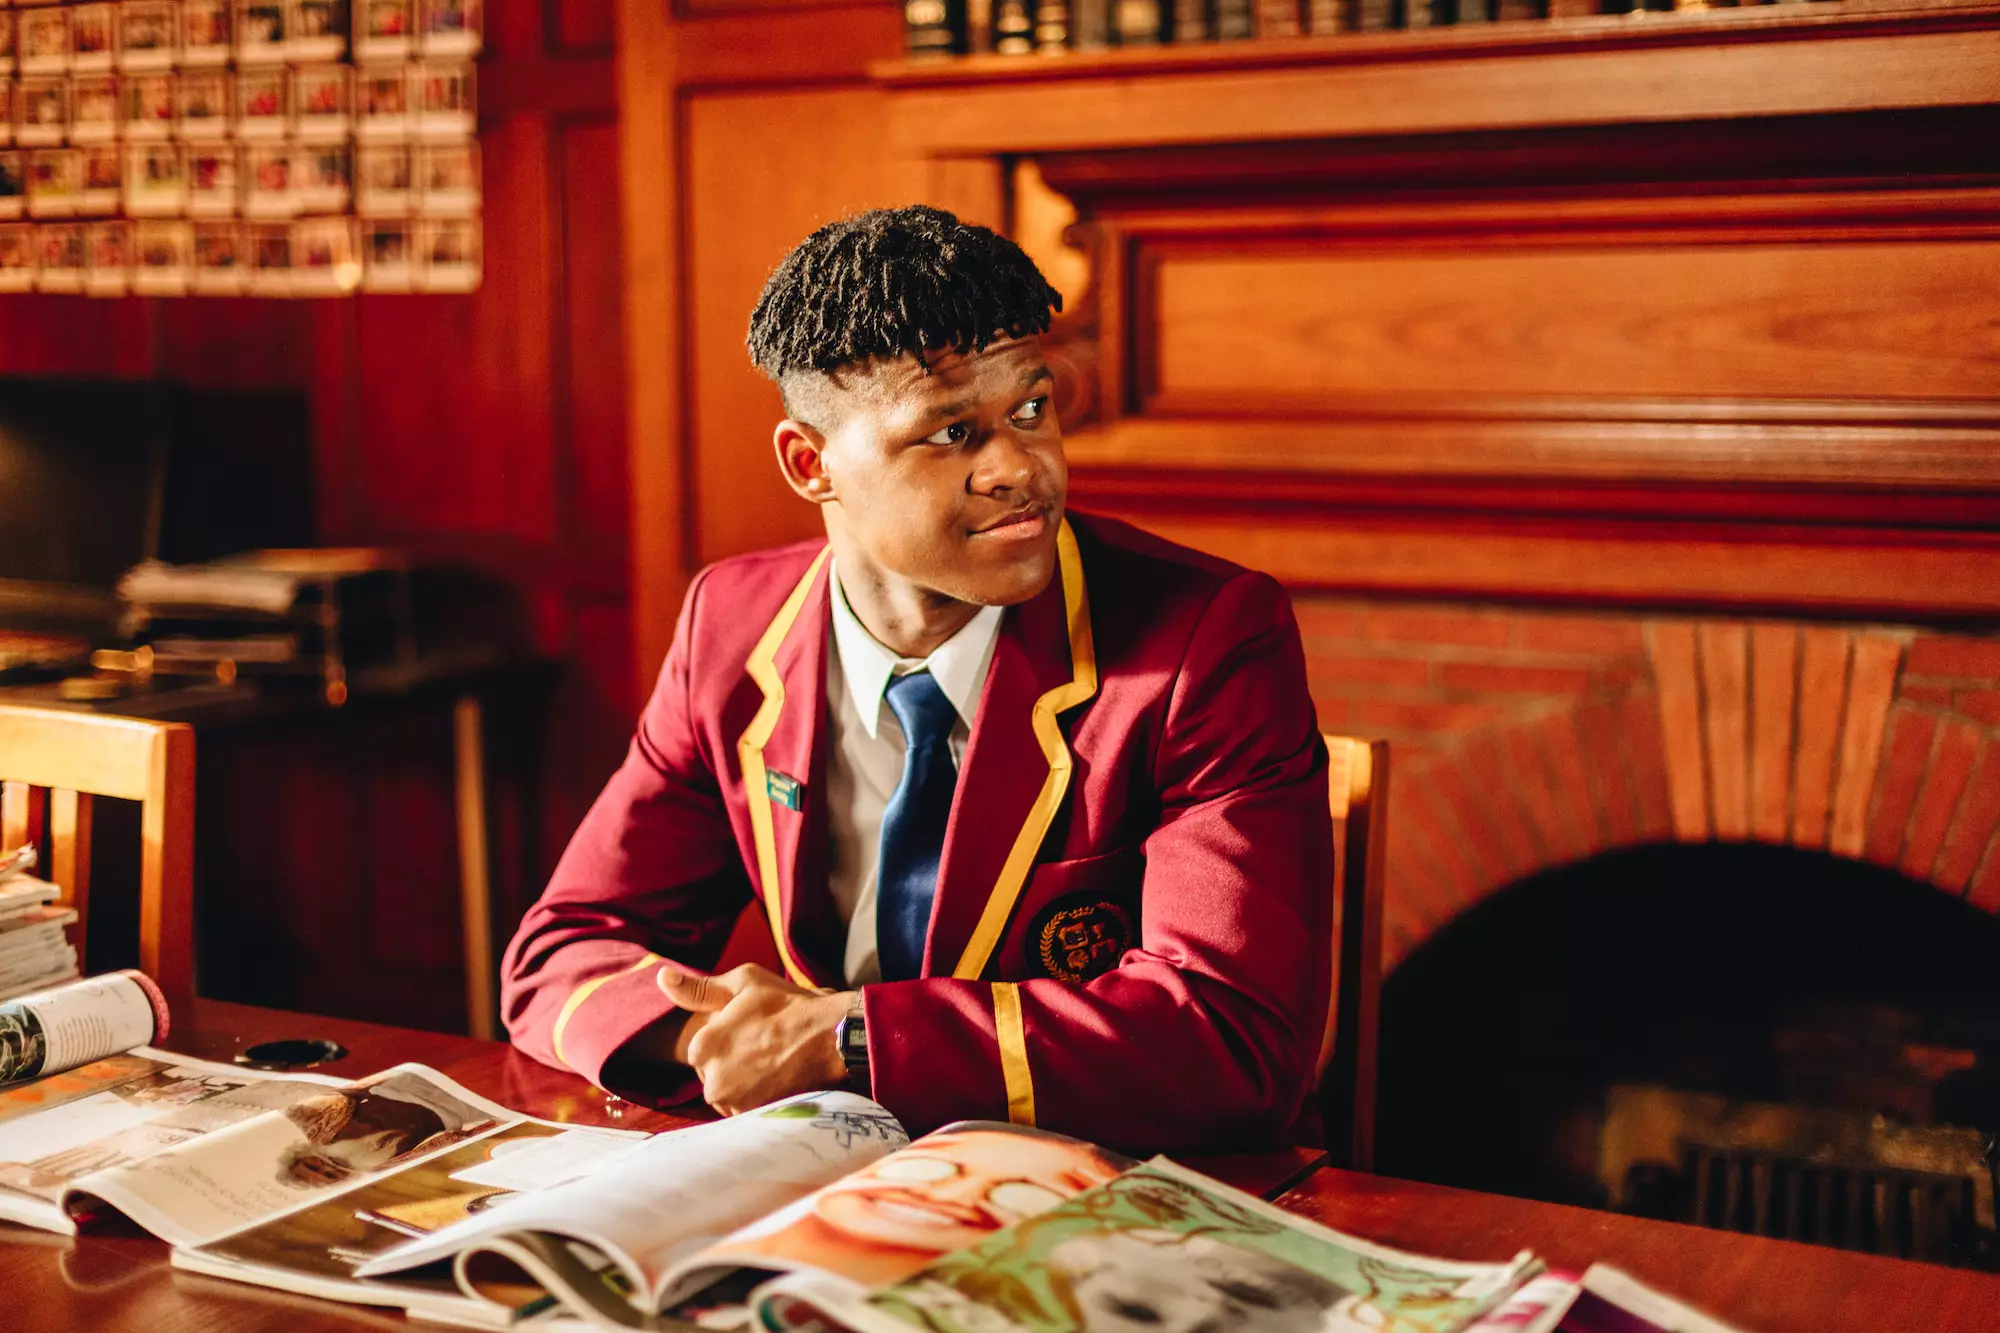 Even the maroon private school uniforms are giving us serious 'Gossip Girl' vibes (